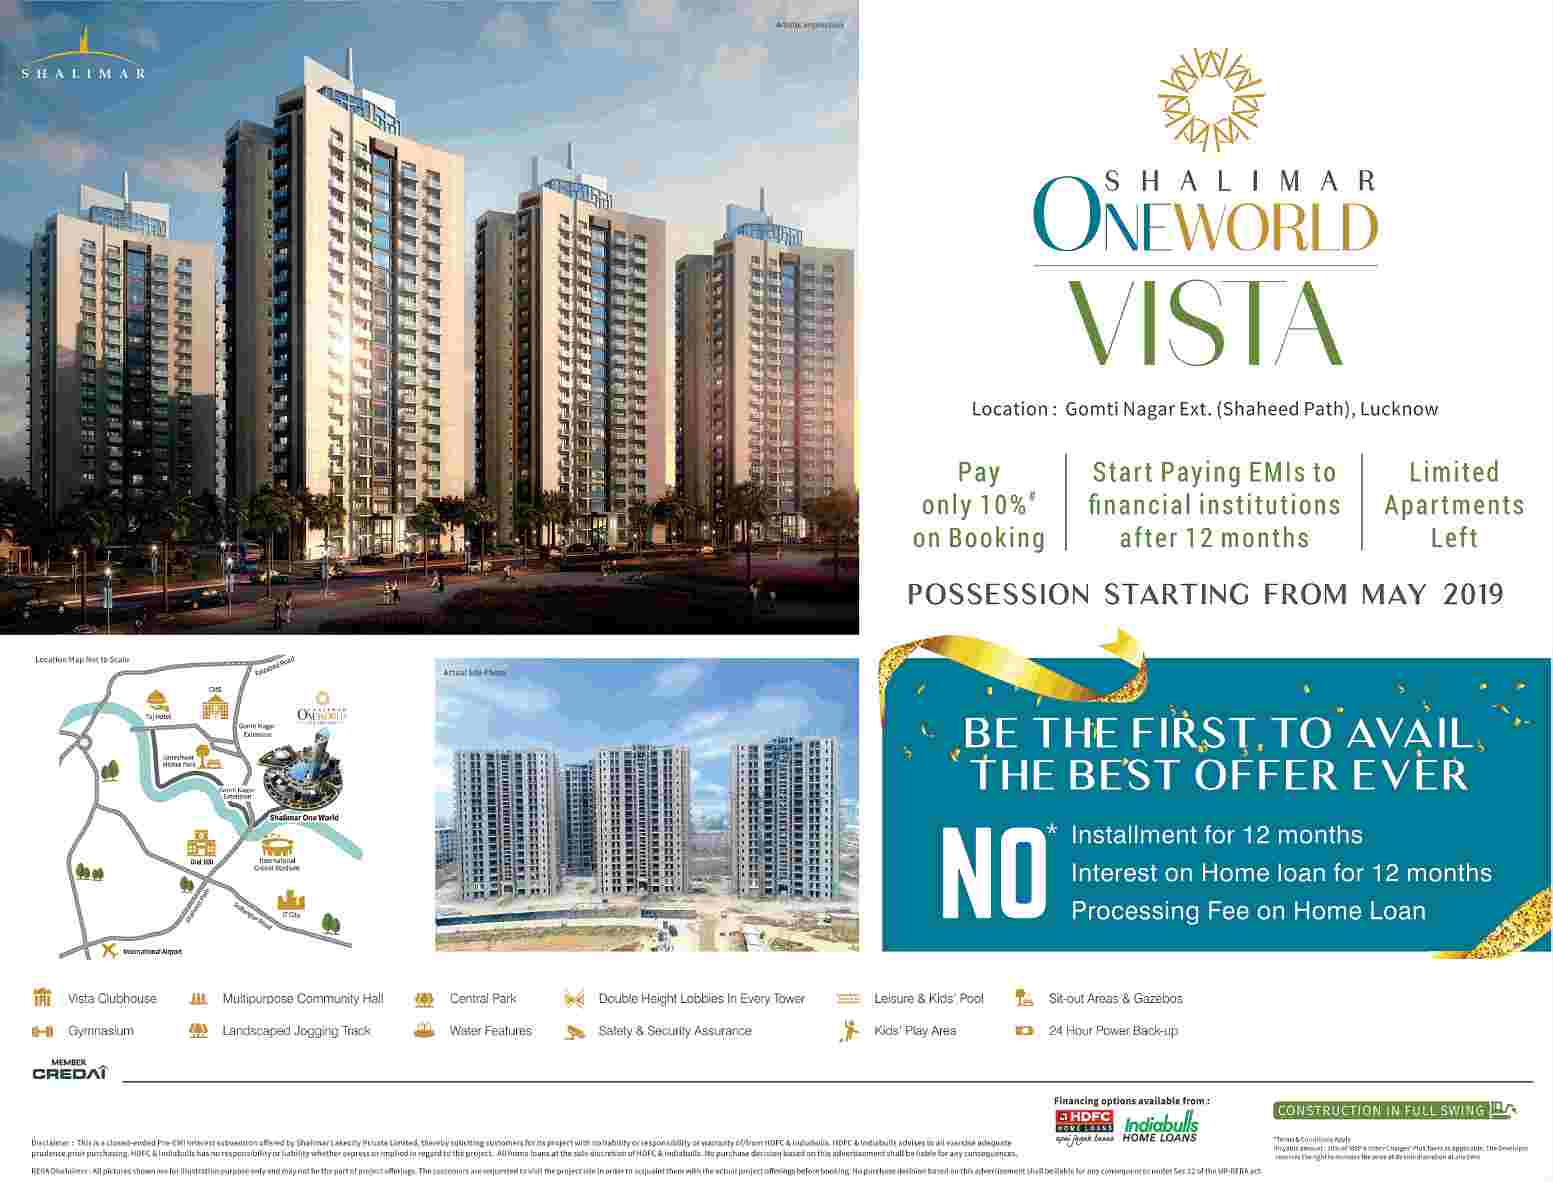 Pay only 10% on booking at Shalimar Oneworld Vista in Lucknow Update